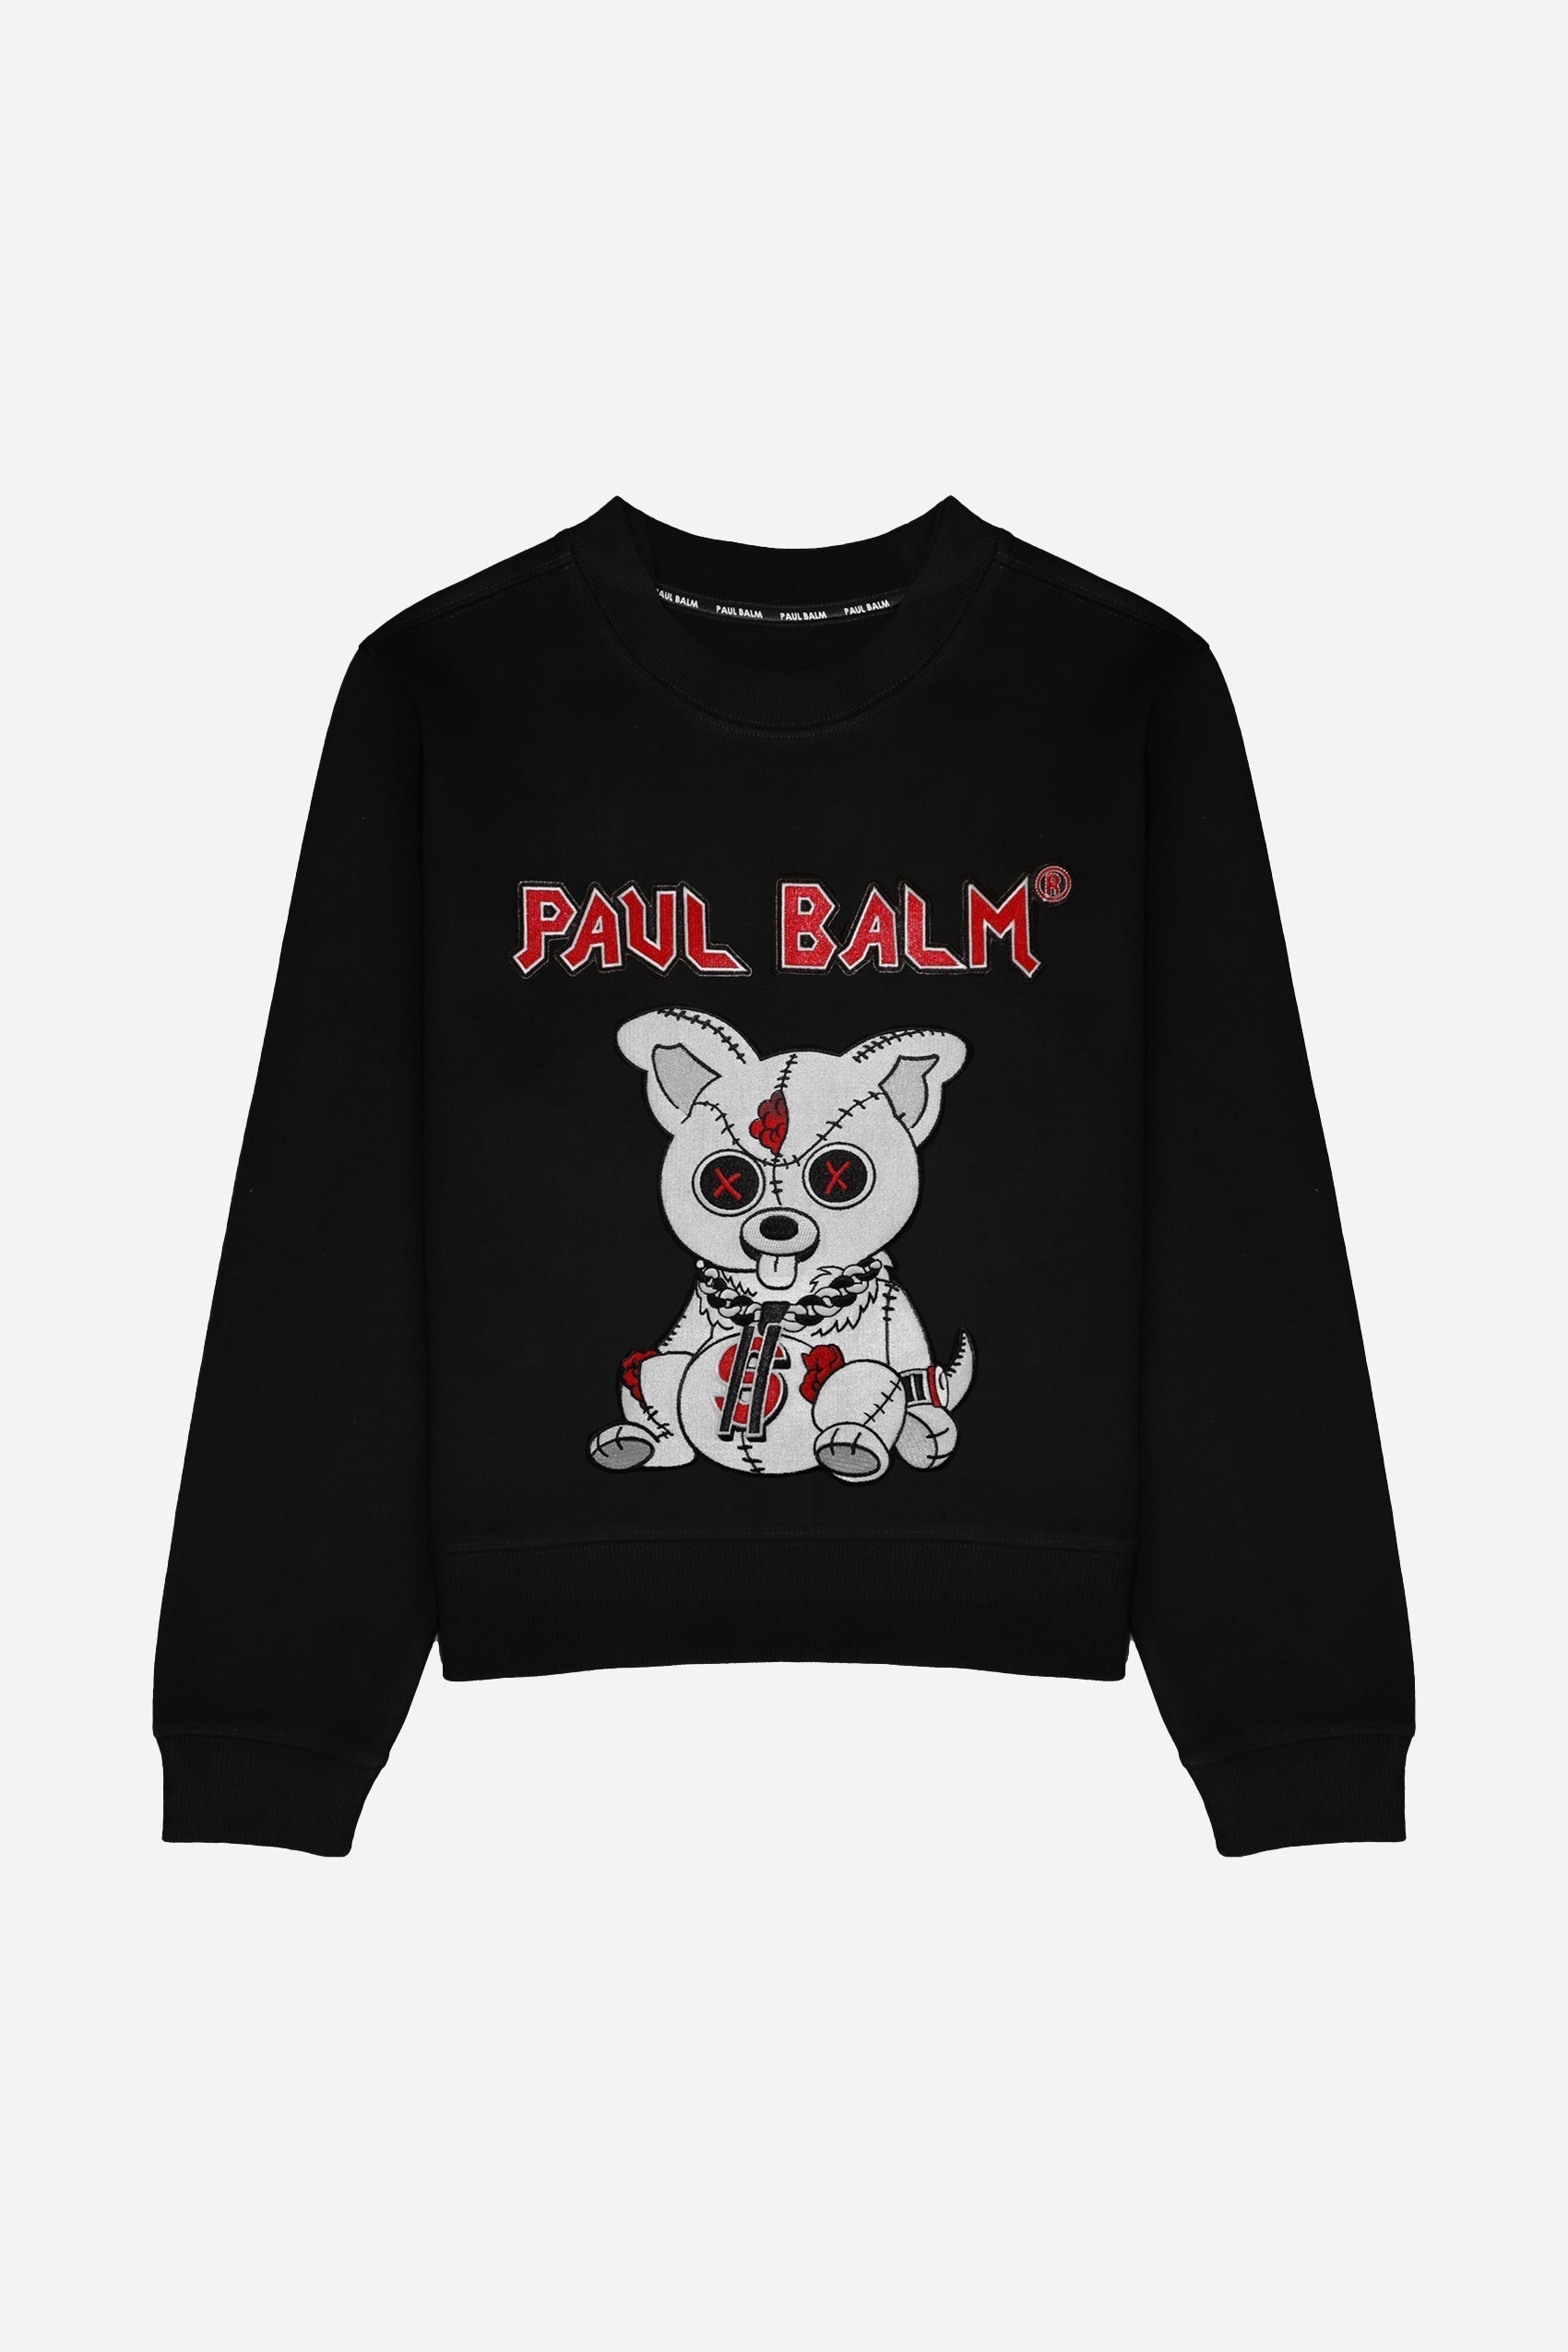 Embroidered White Teddy Sweatshirt - Limited to 300 - PAUL BALM WORLD